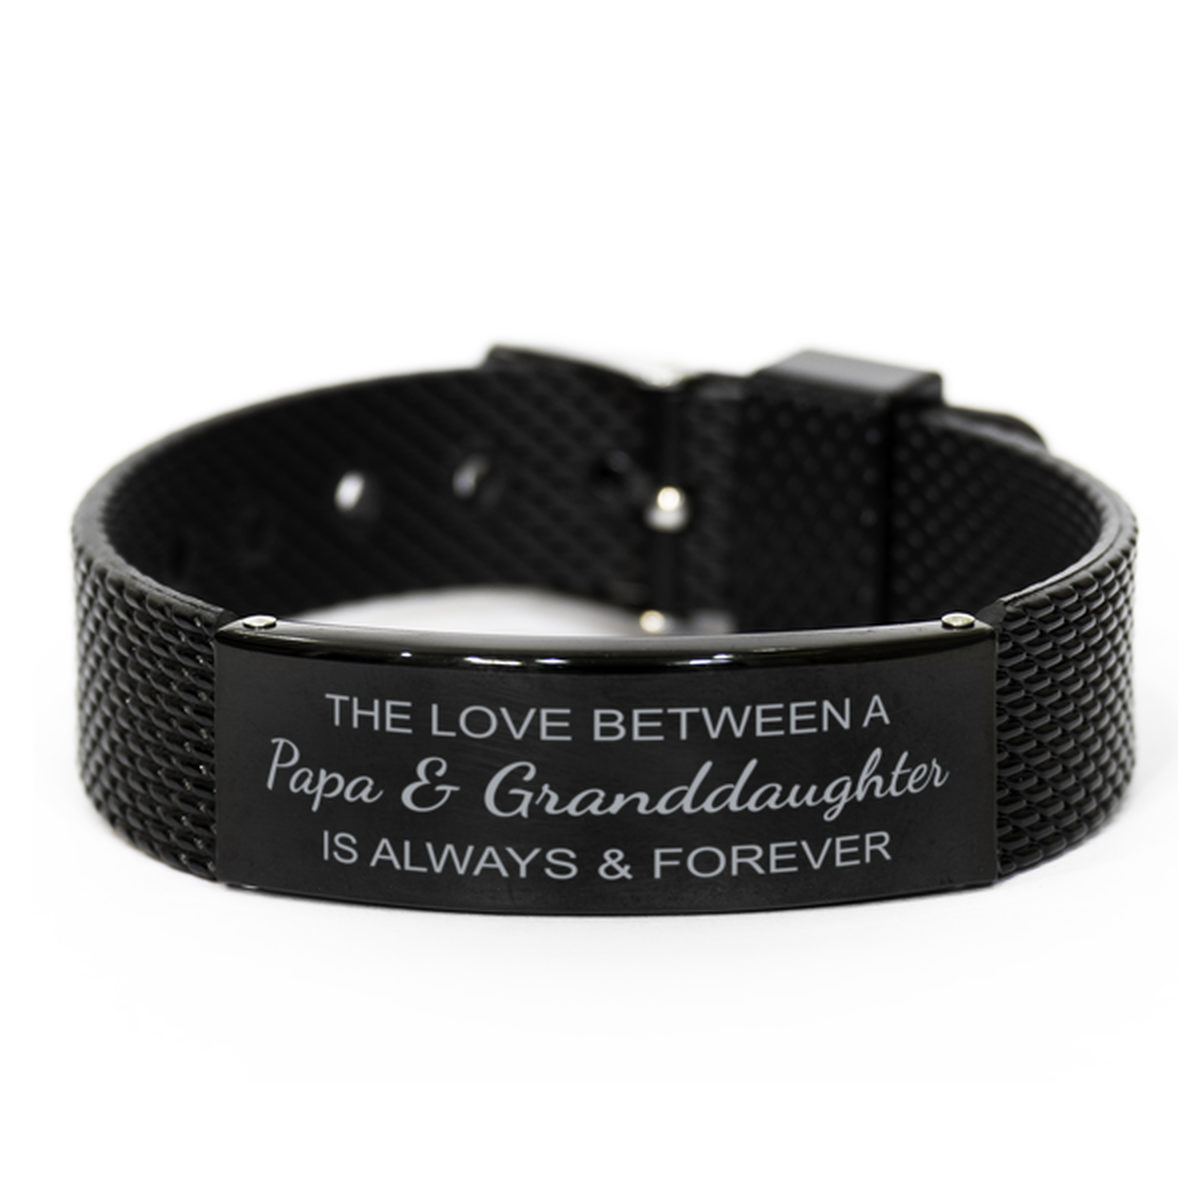 The Love Between a Papa and Granddaughter is Always and Forever Bracelet, Papa Granddaughter Bracelet, Black Stainless Steel Leather Bracelet, Christmas.